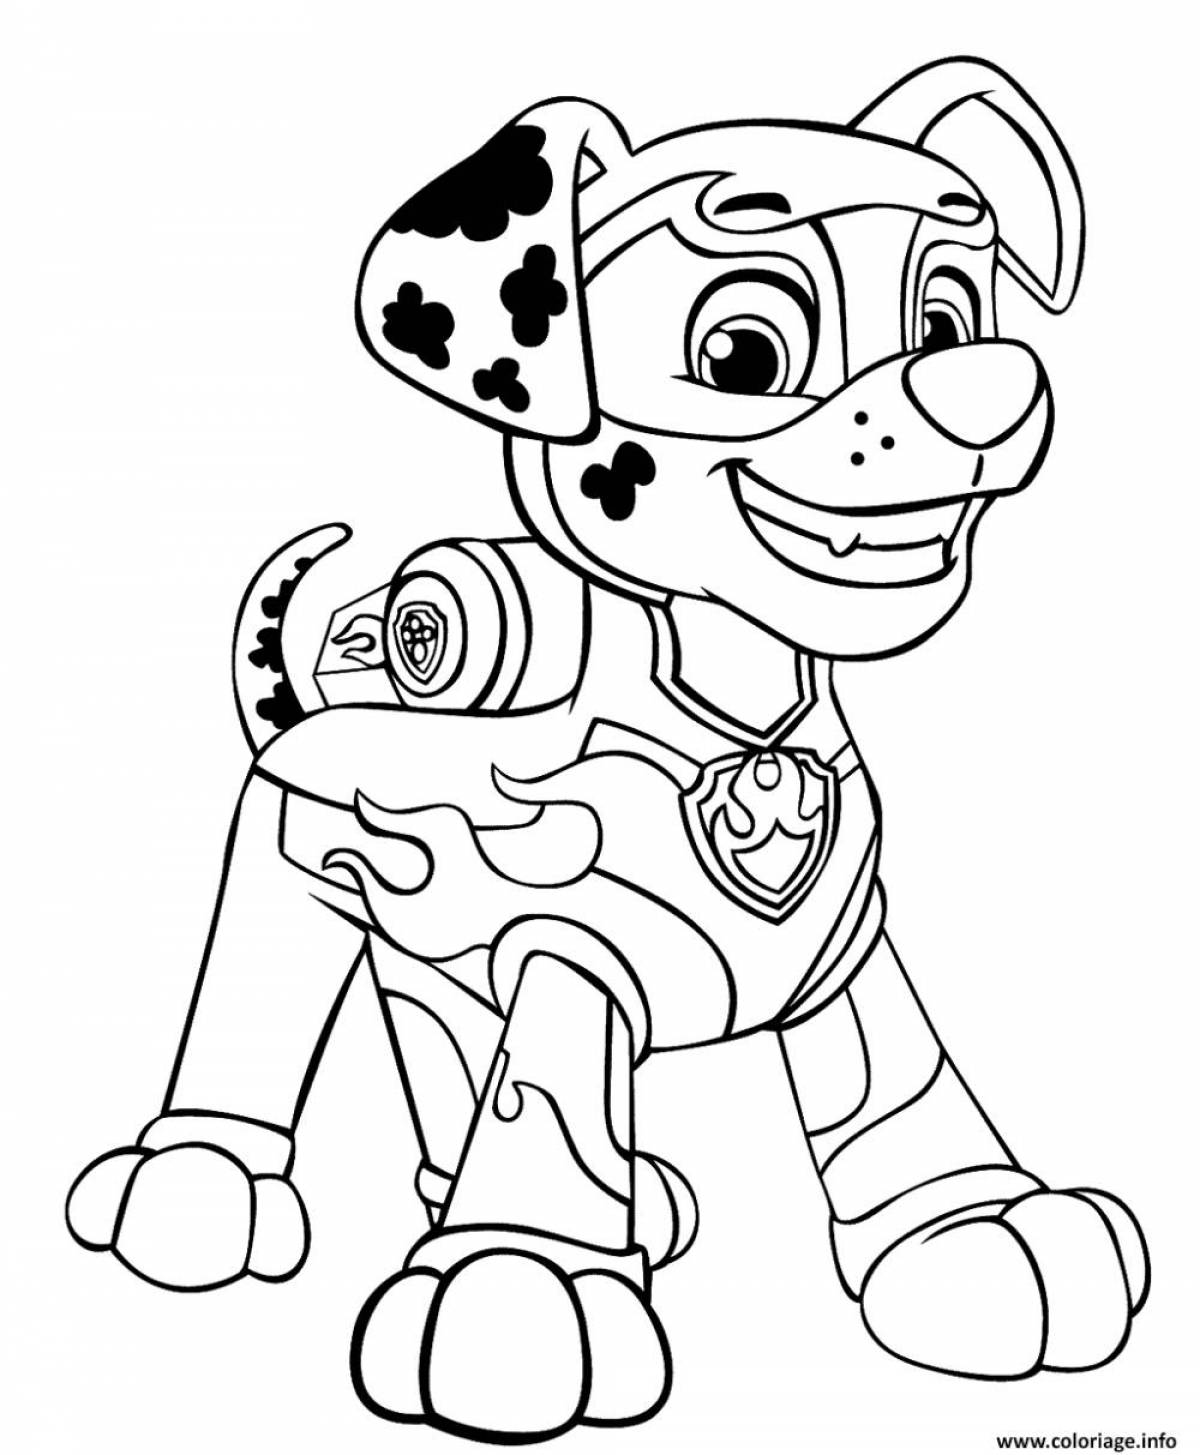 Delightful paw patrol coloring book new